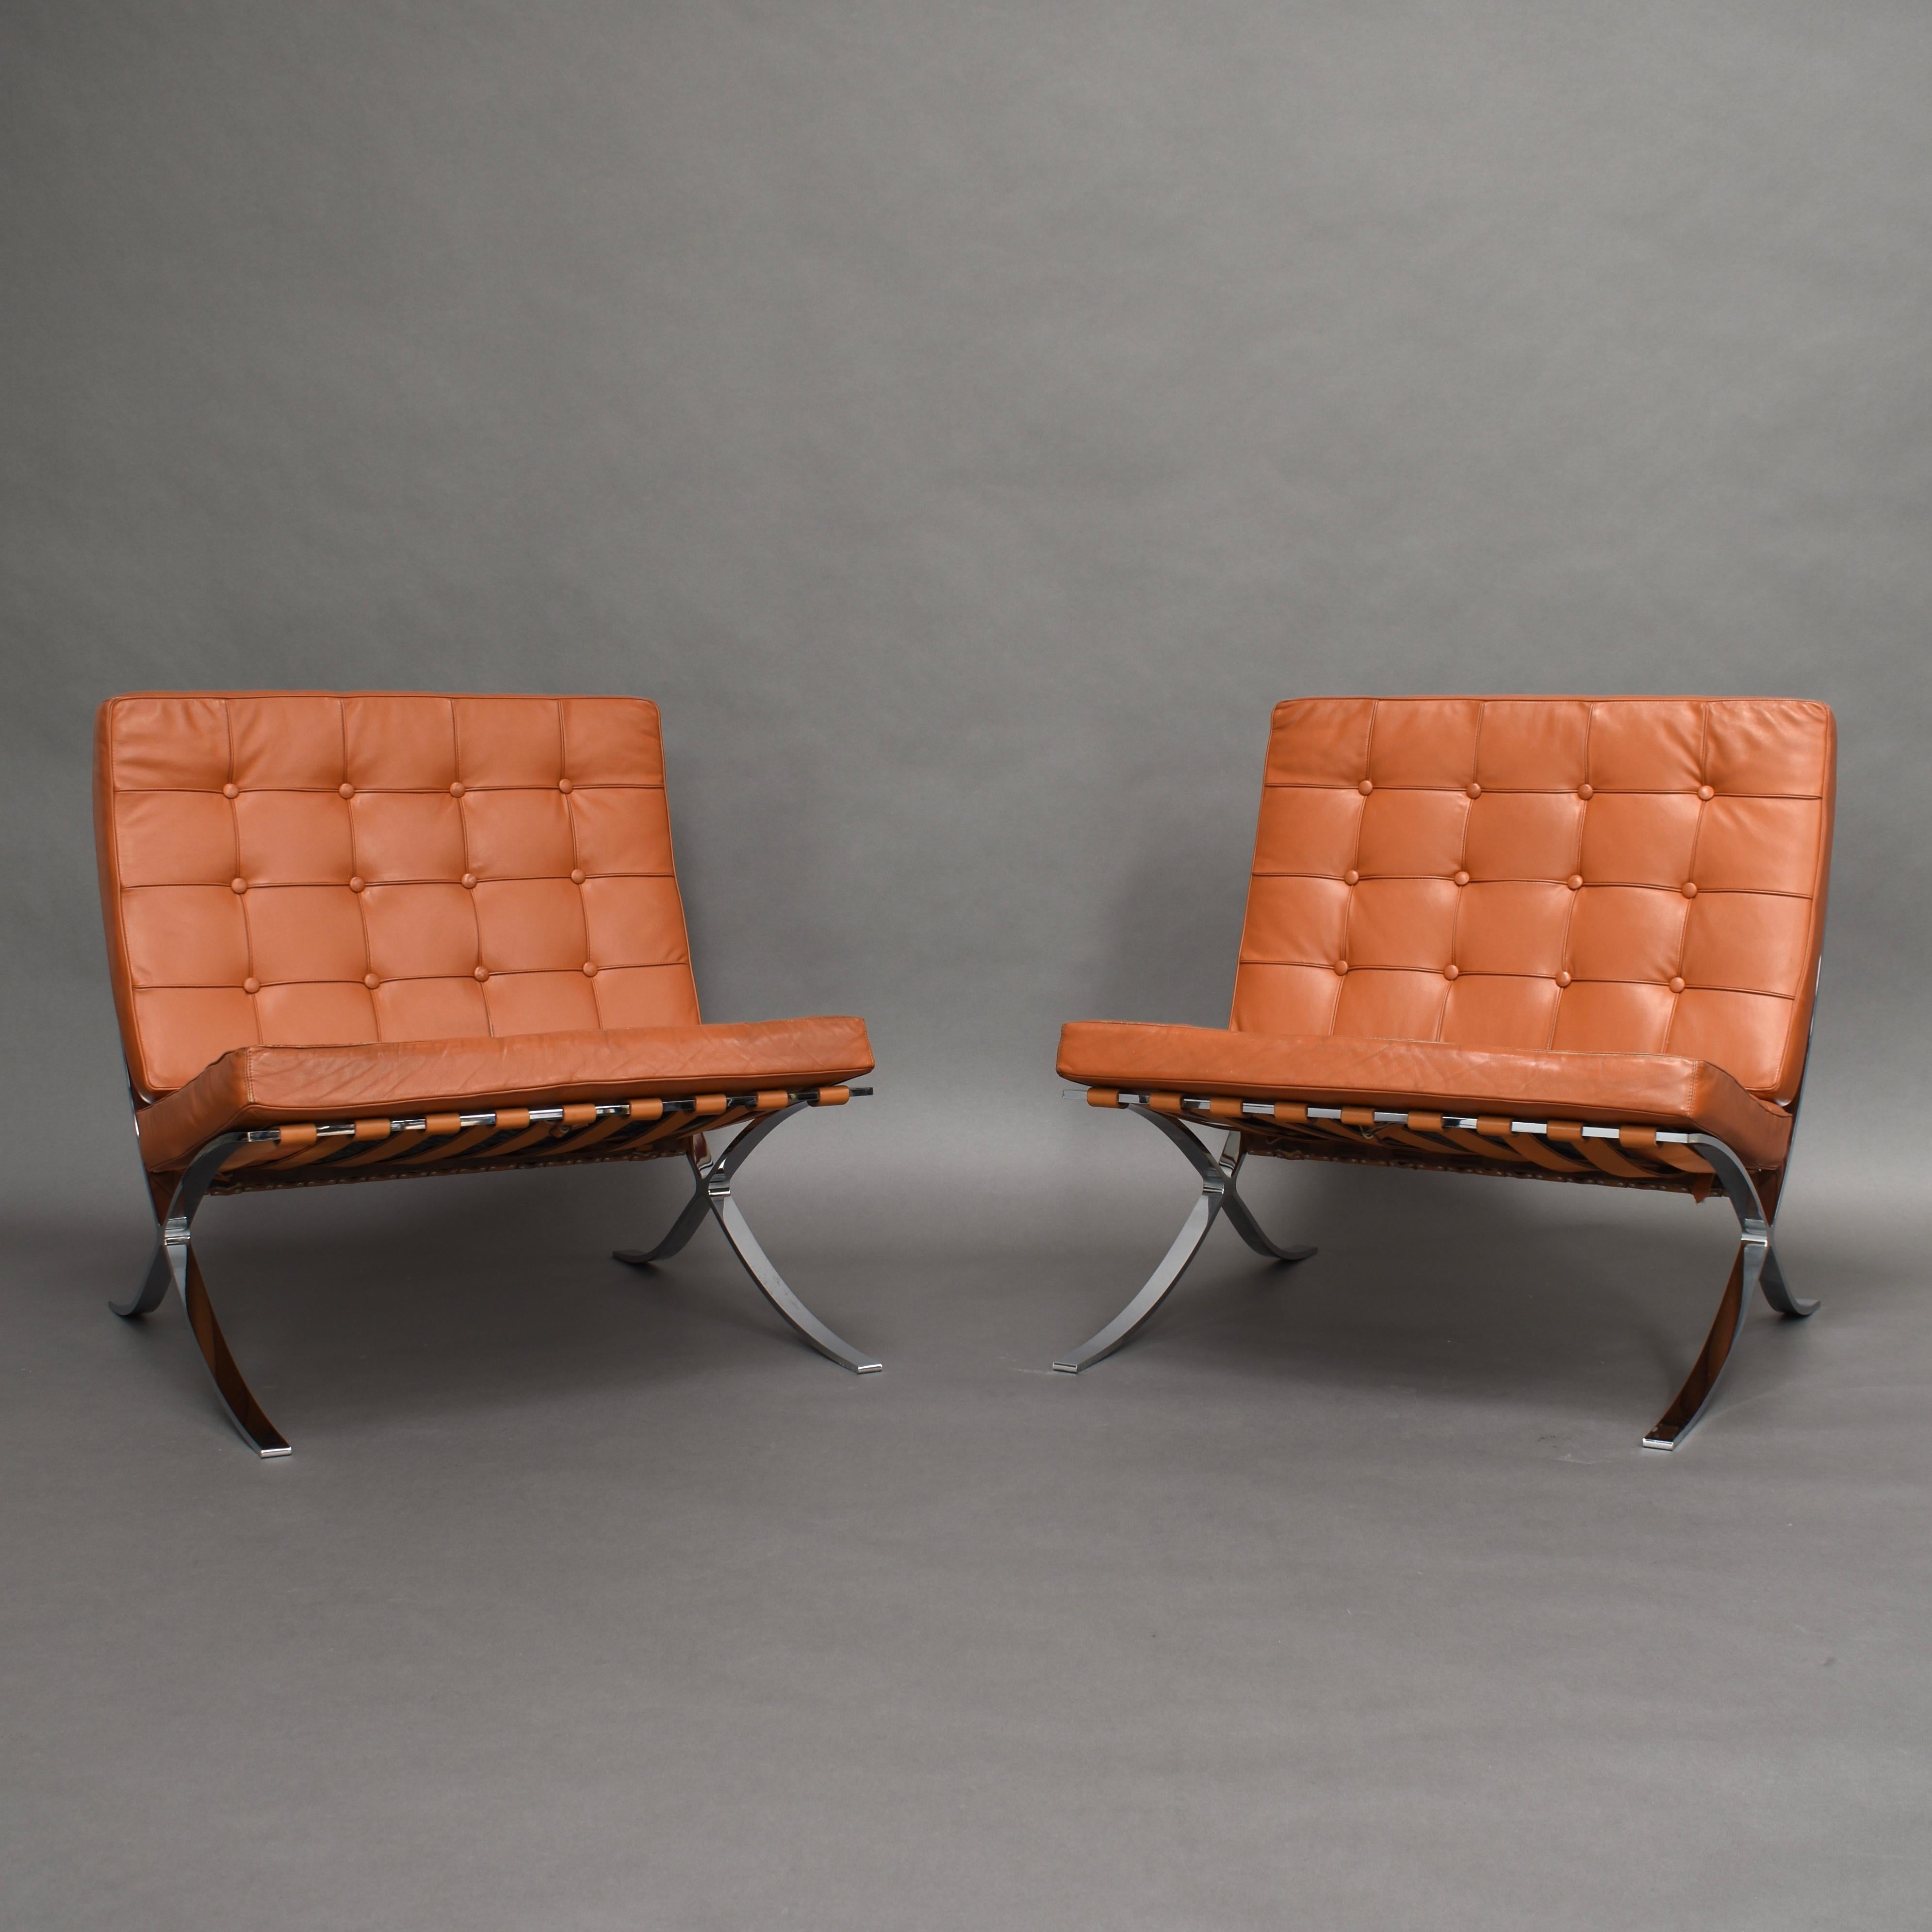 Pair of Barcelona chairs in tan leather by Ludwig Mies van der Rohe for Alivar, Italy.
Alivar has the official license for European production.
With original purchase receipt.

The seat cushions have signs of use and wear. One of then seat